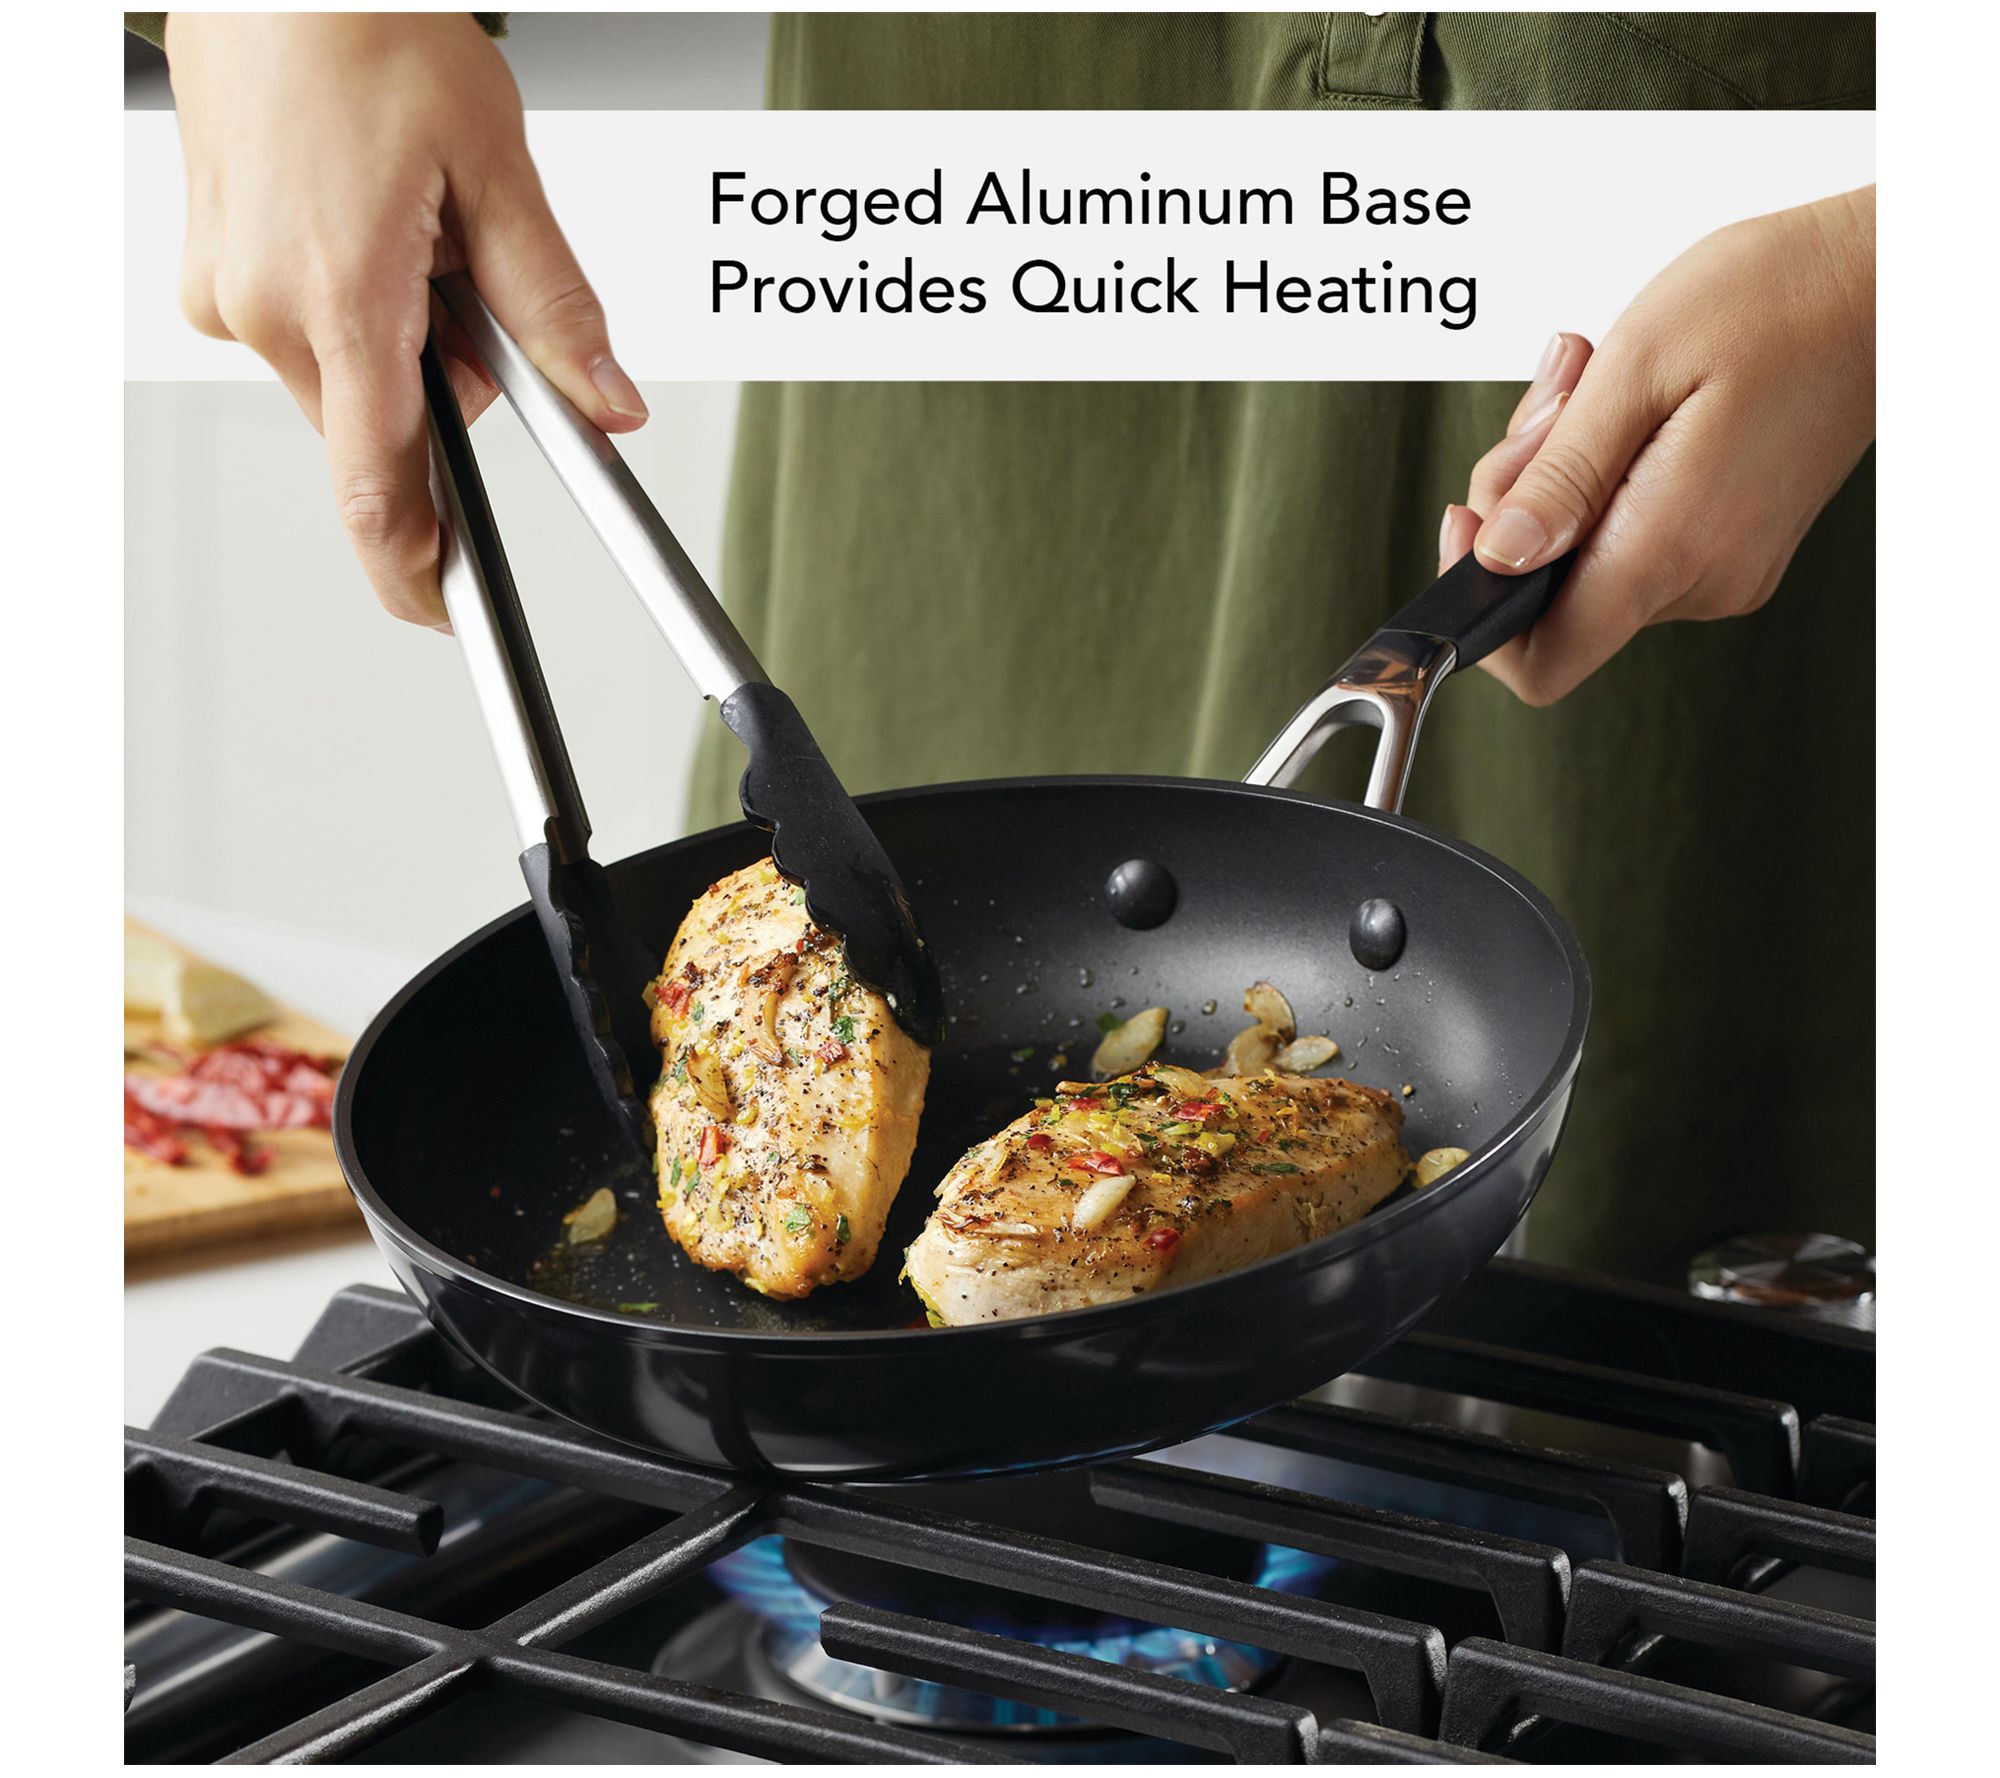 Armor Max Sauté Pan with Lid 5.5 Qt Non Stick Deep Frying Pan with Lid